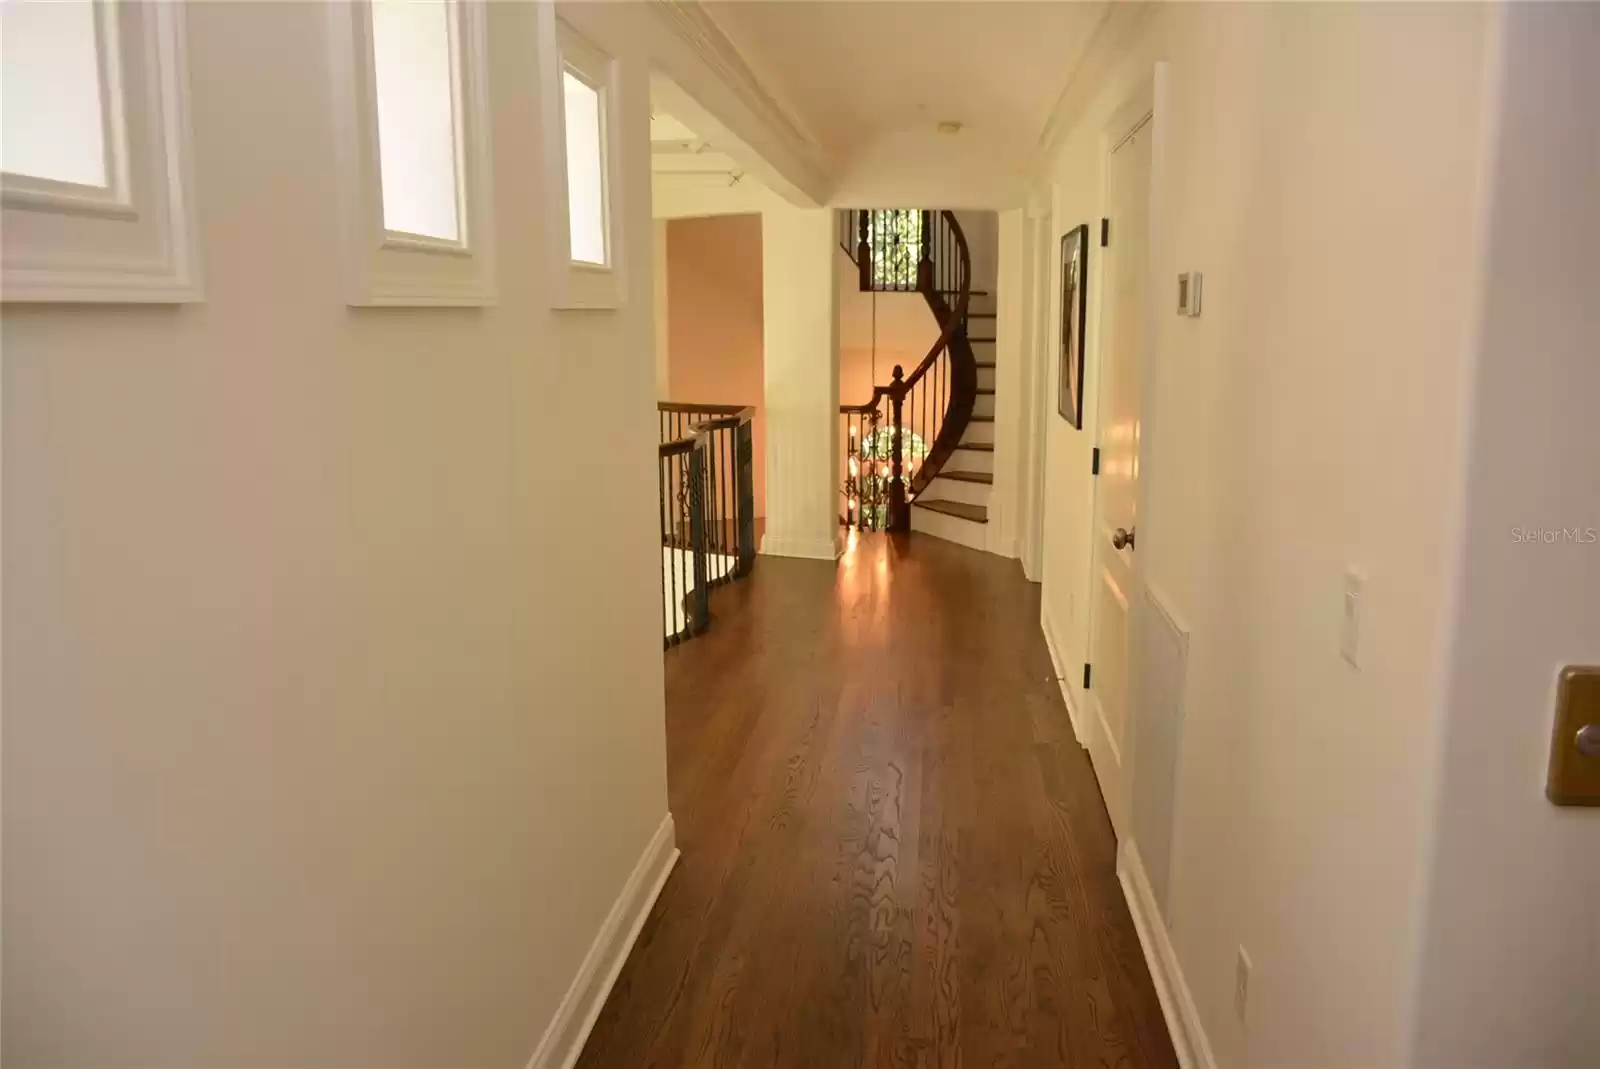 Hardwood floors extend from the balcony/hallway into the owner’s bedroom suite with dual walk-in closets, vaulted ceiling and private balcony